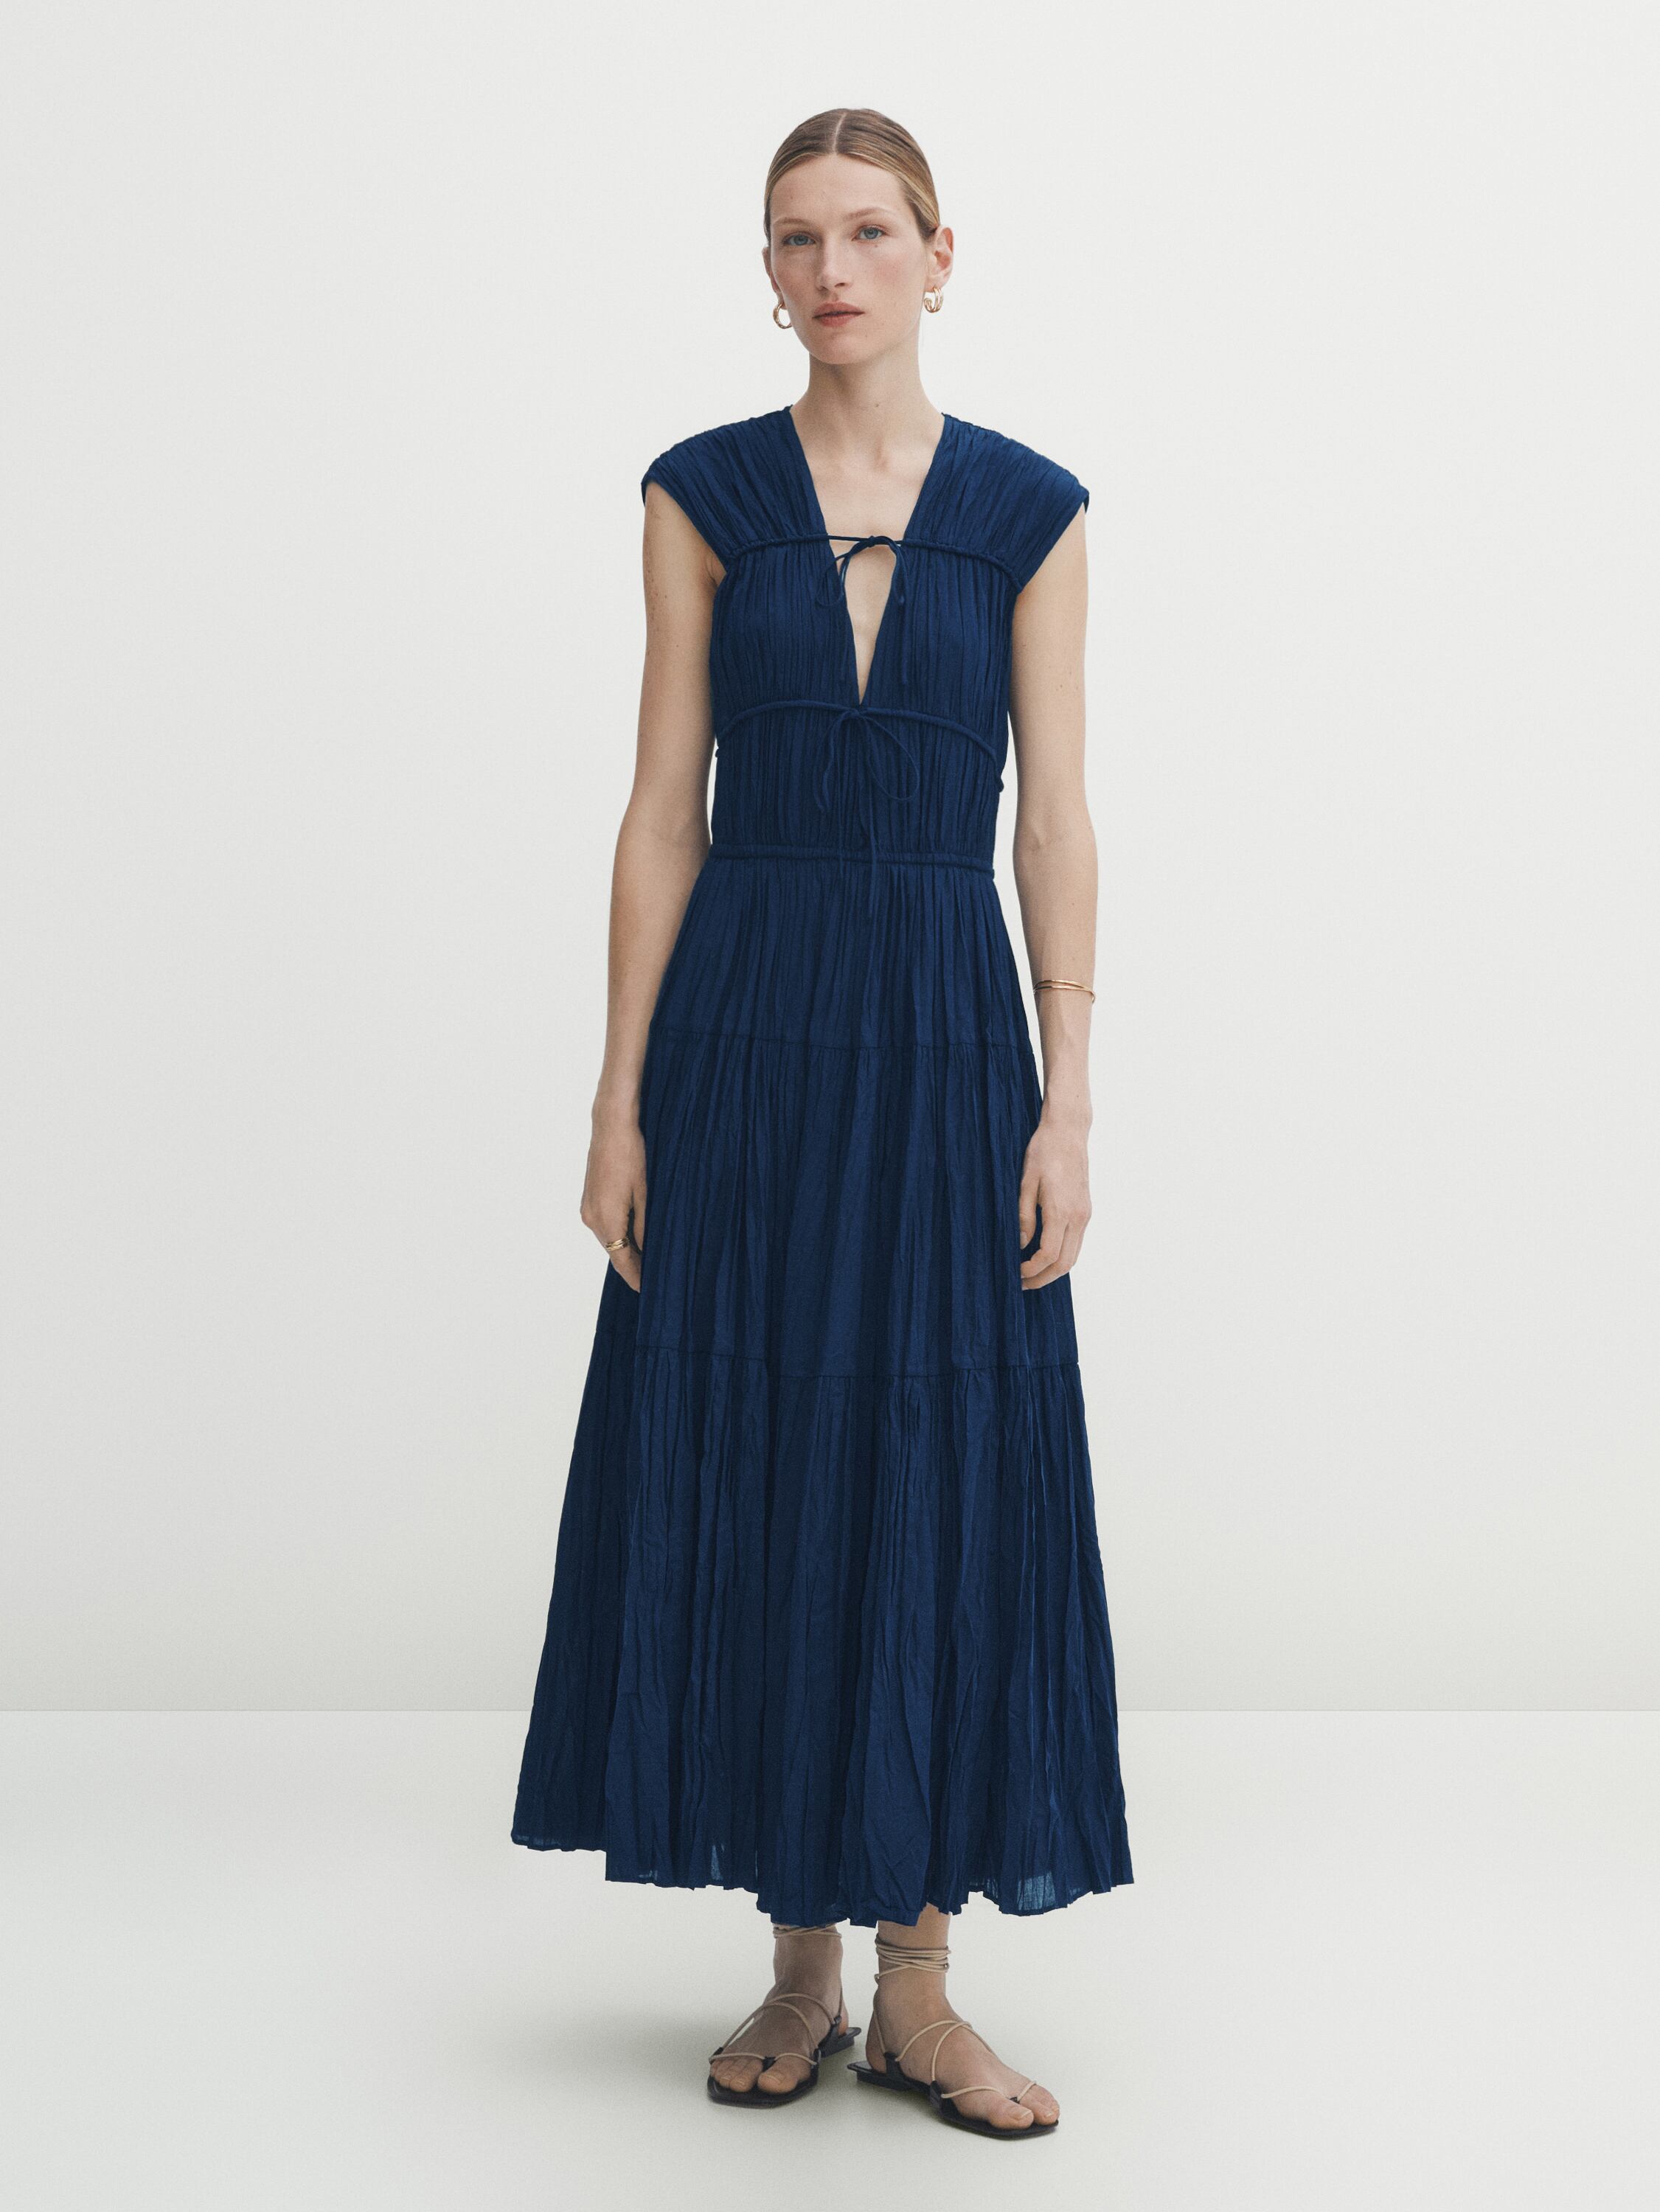 Pleated dress with tie details